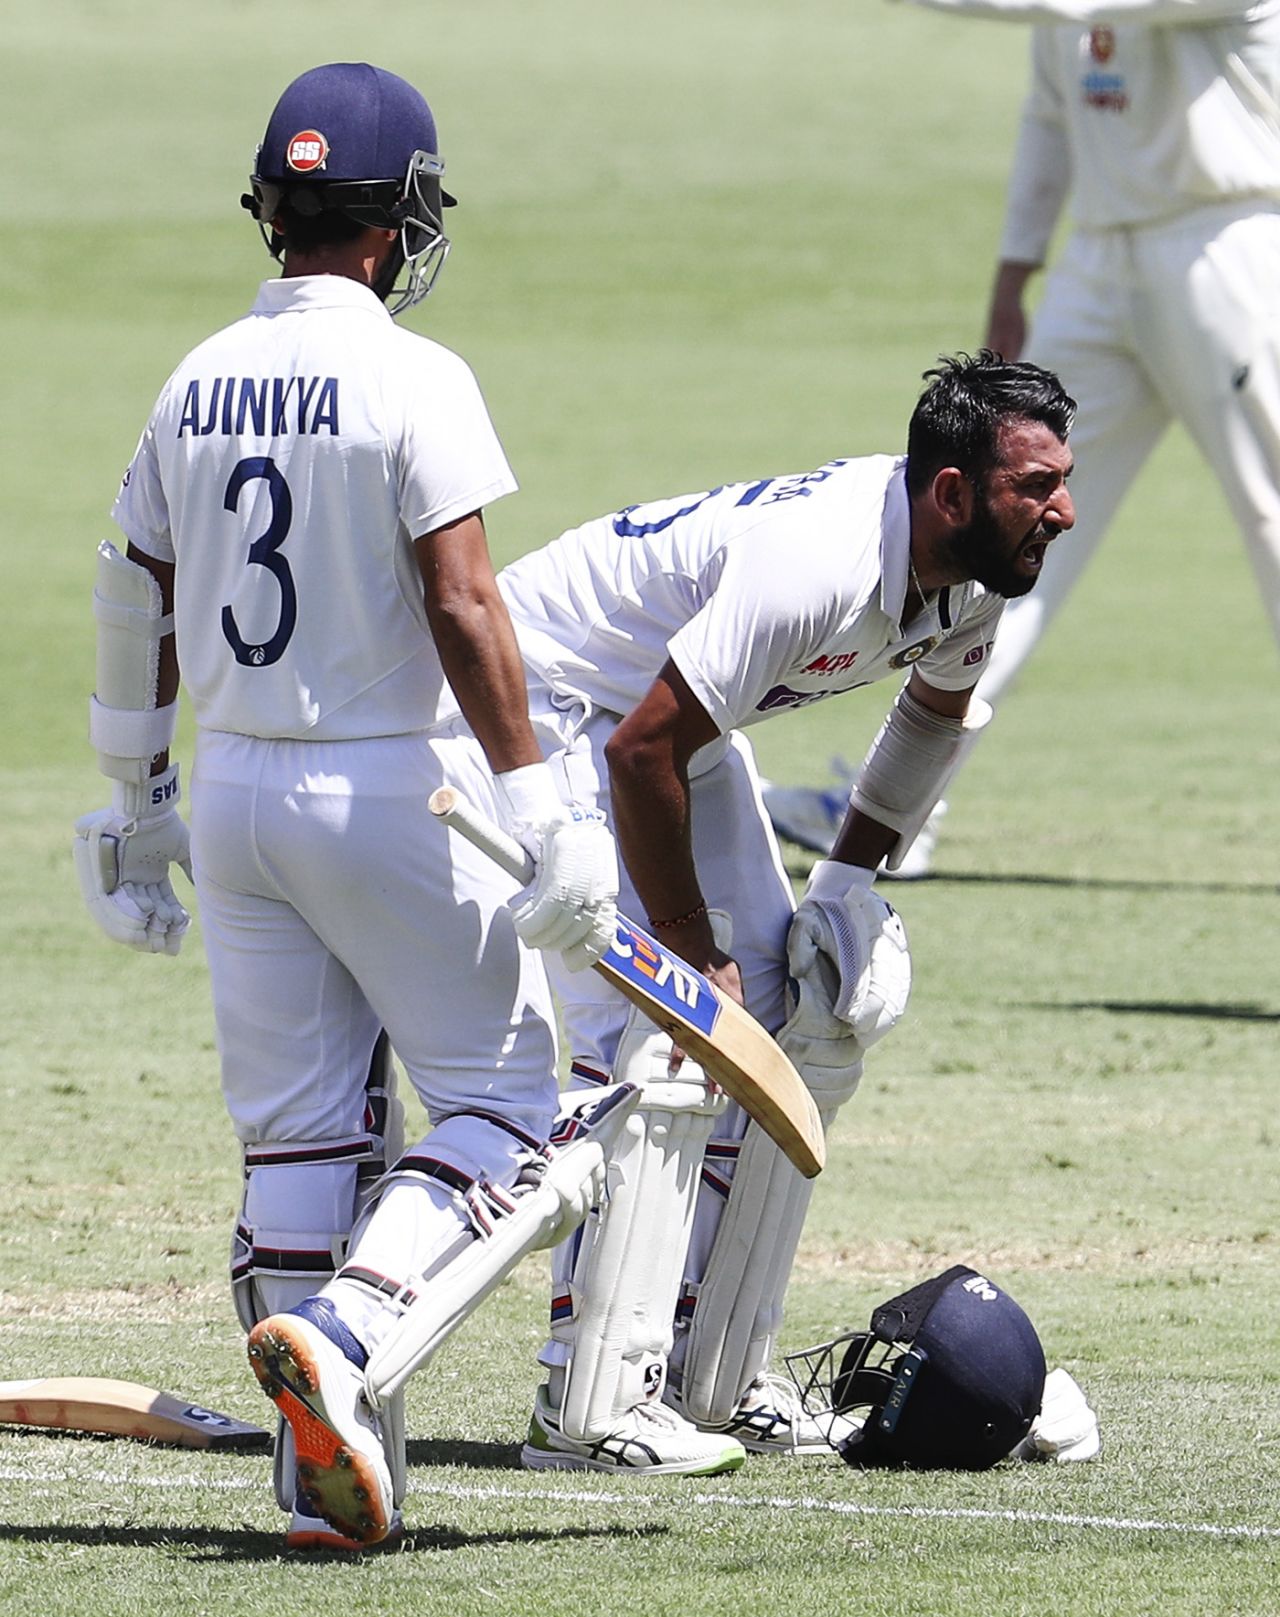 Cheteshwar Pujara reacts in pain after being hit on his hand, Australia v India, 4thTest, Brisbane, 5th day, January 19, 2021